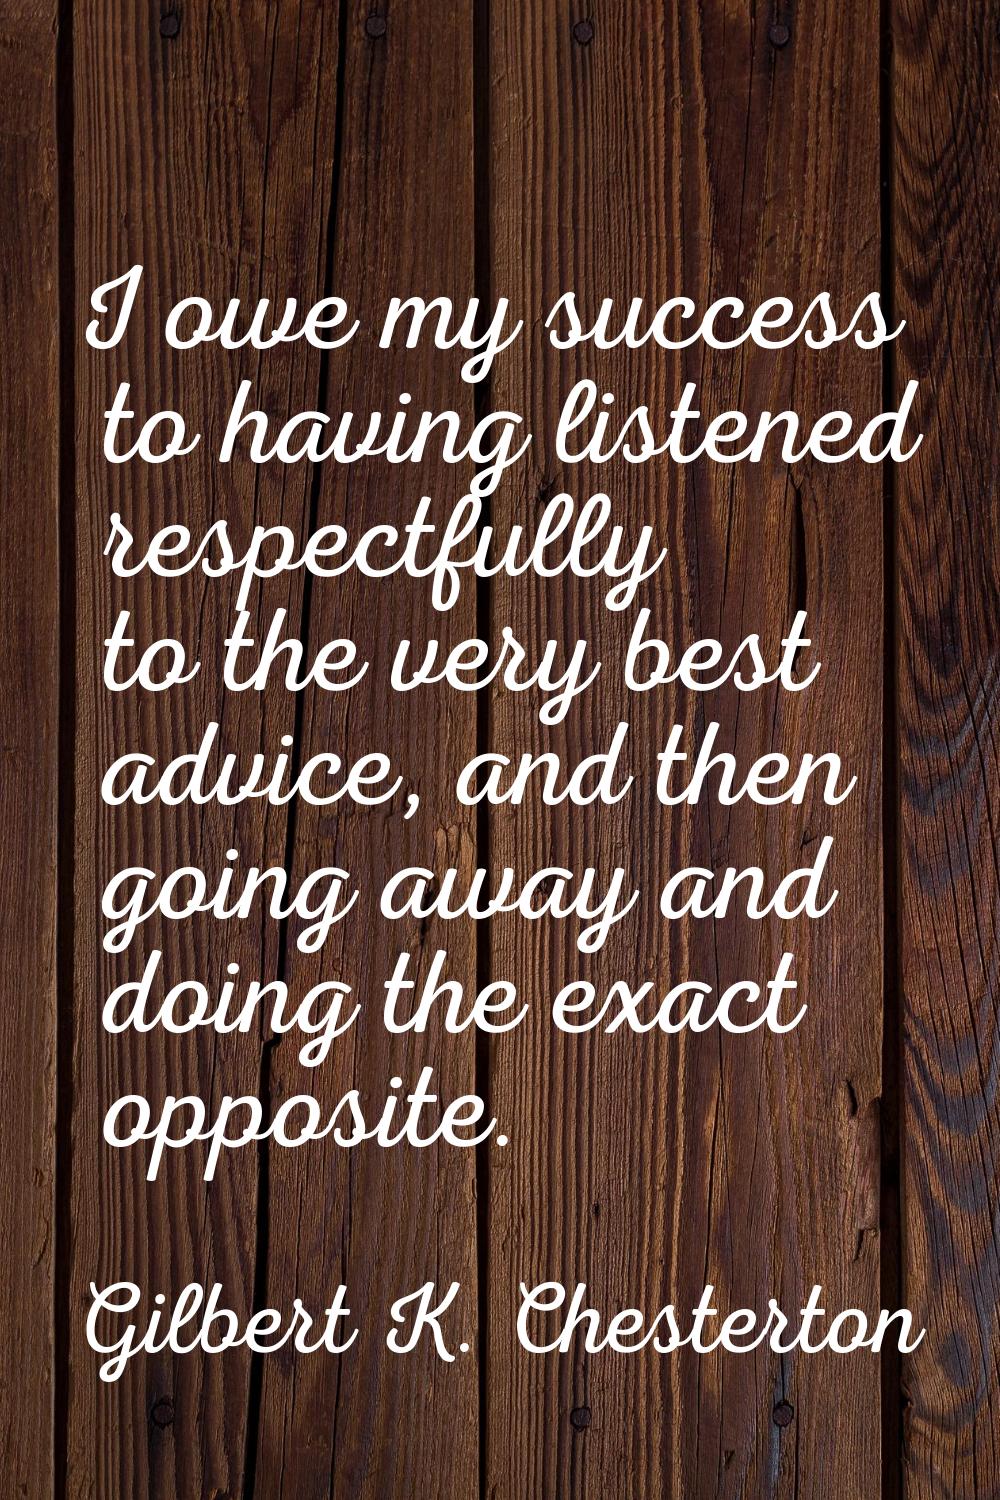 I owe my success to having listened respectfully to the very best advice, and then going away and d